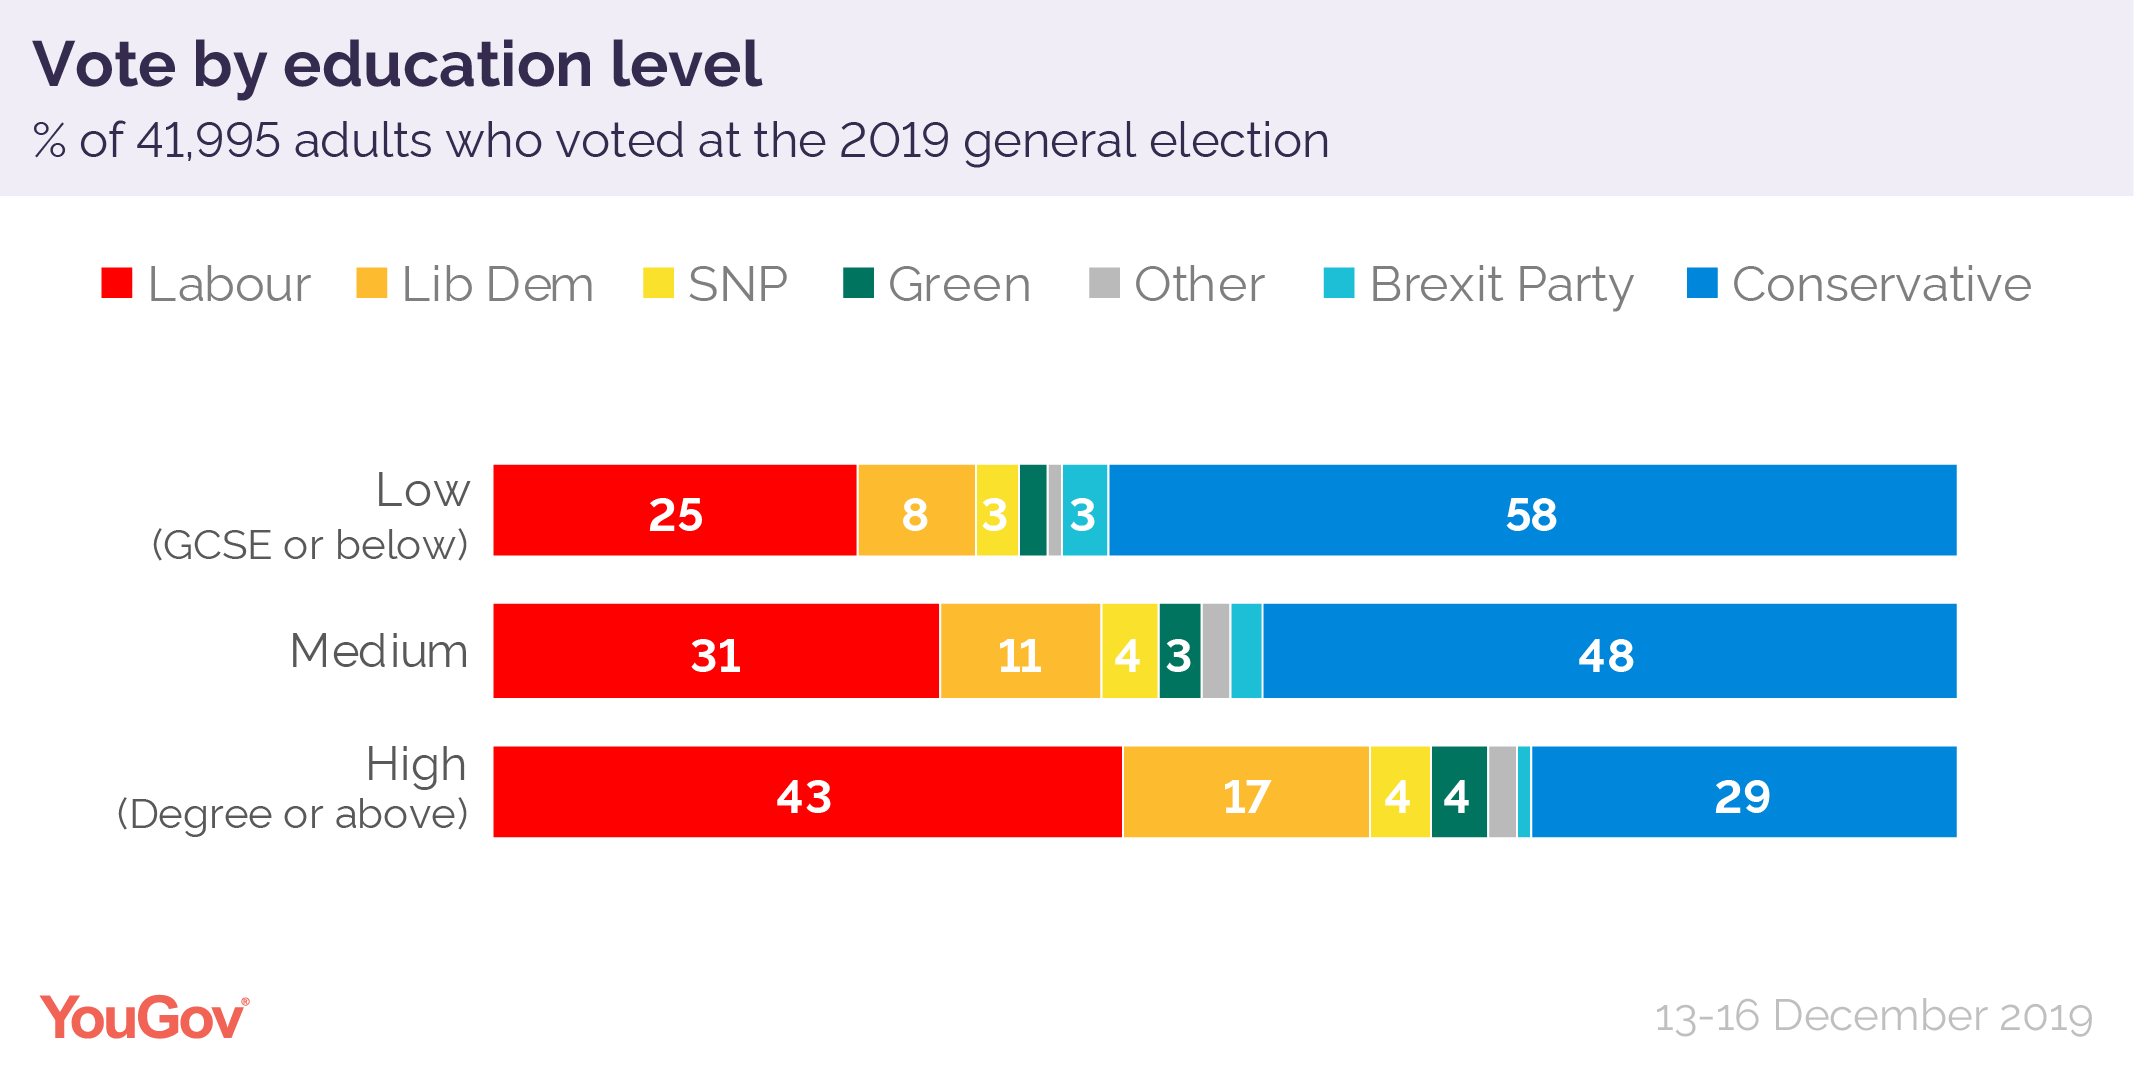 How%20Britain%20voted%202019%20education%20level-01.png